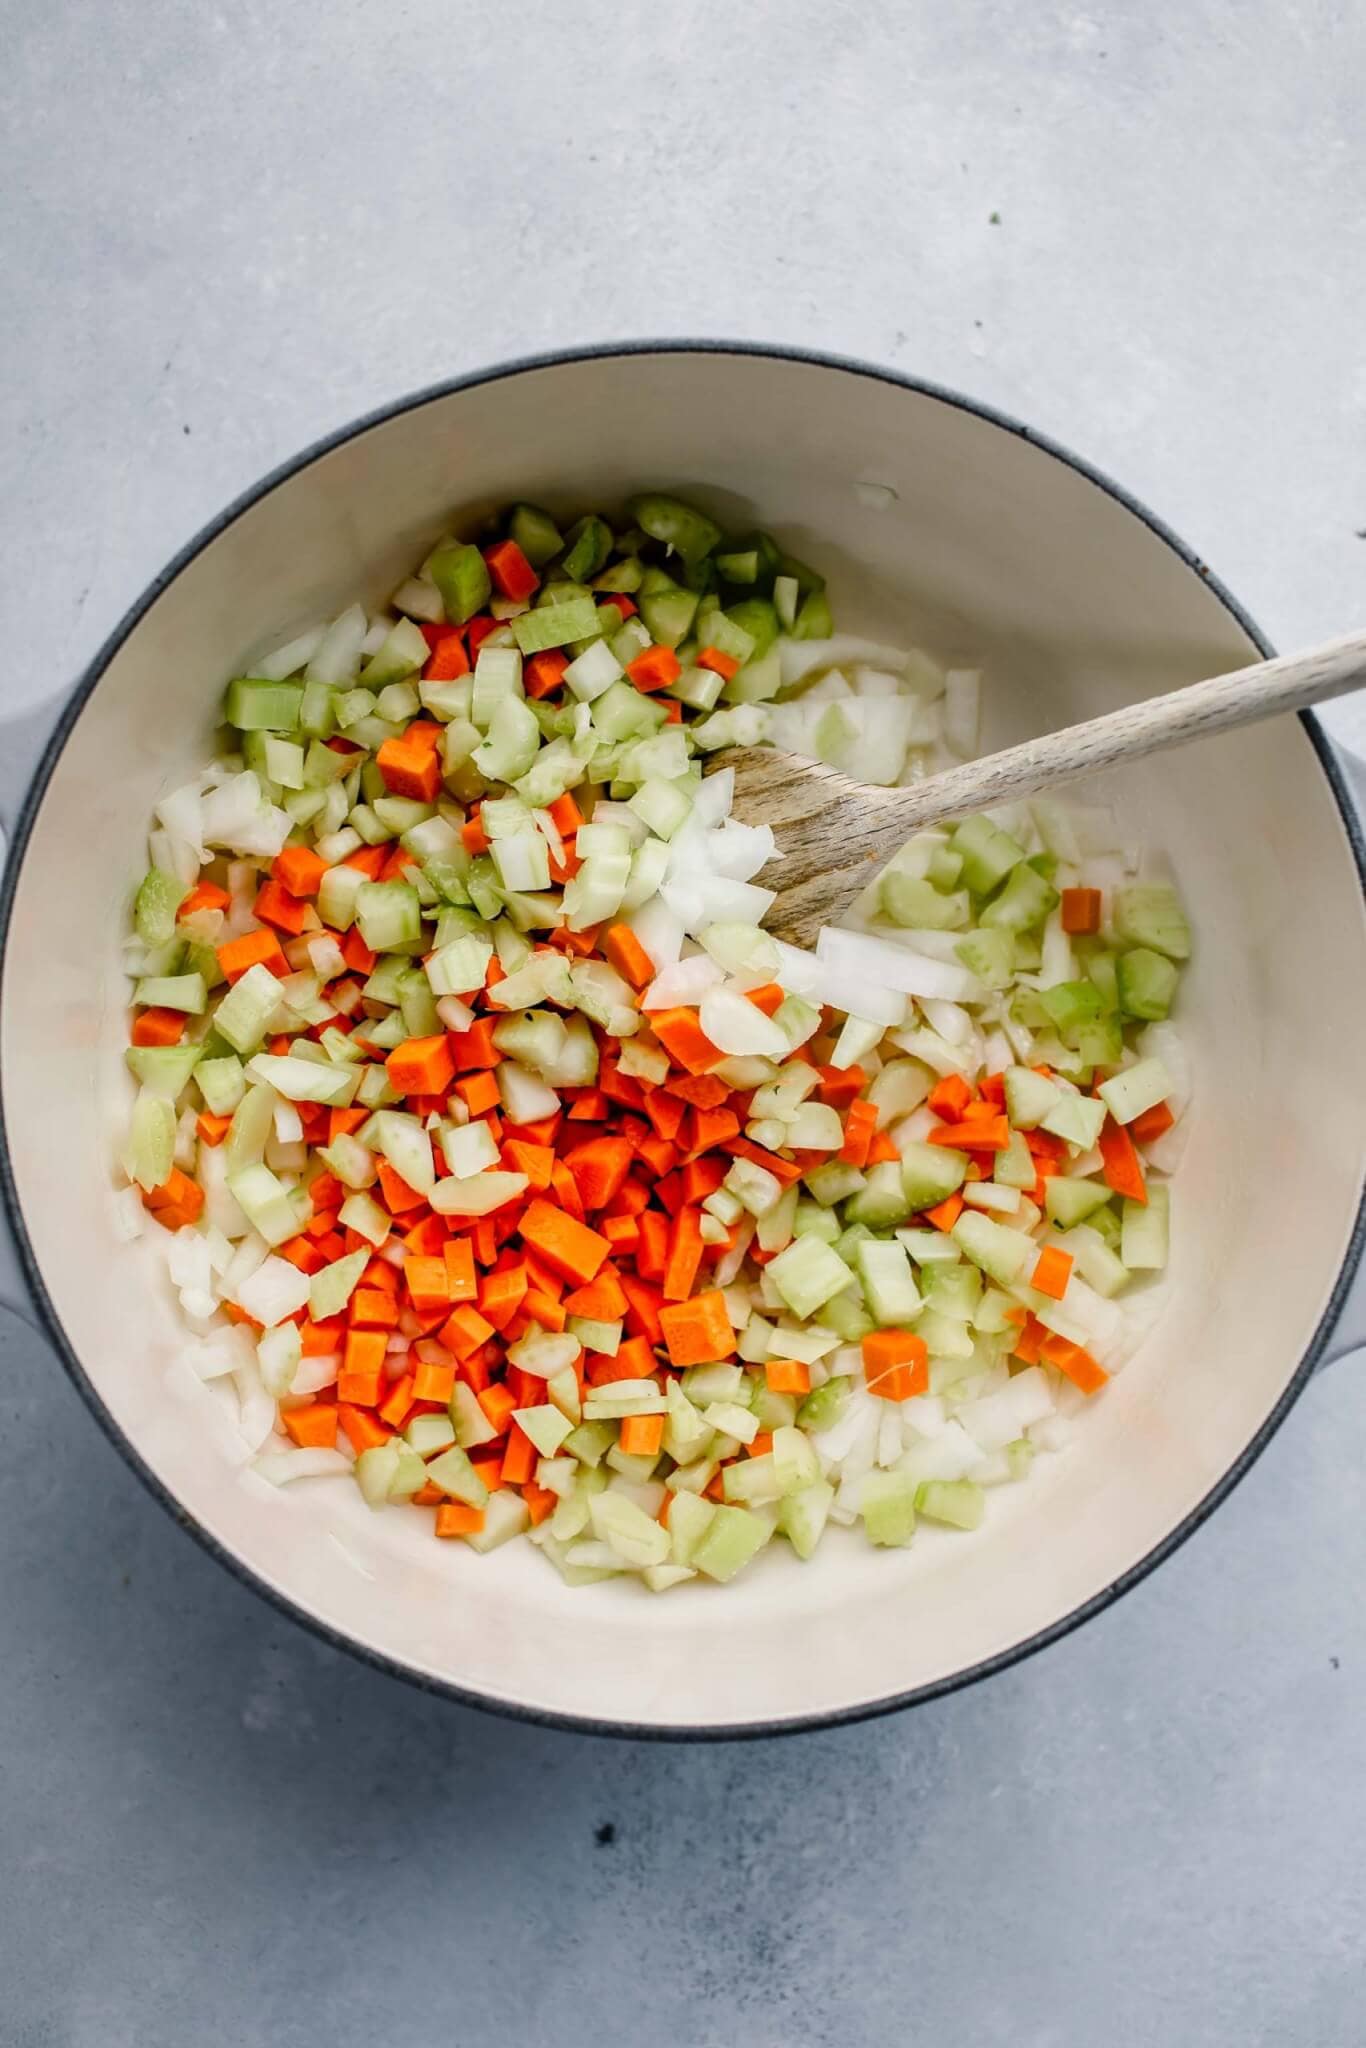 Celery, carrots and onions in saute pan